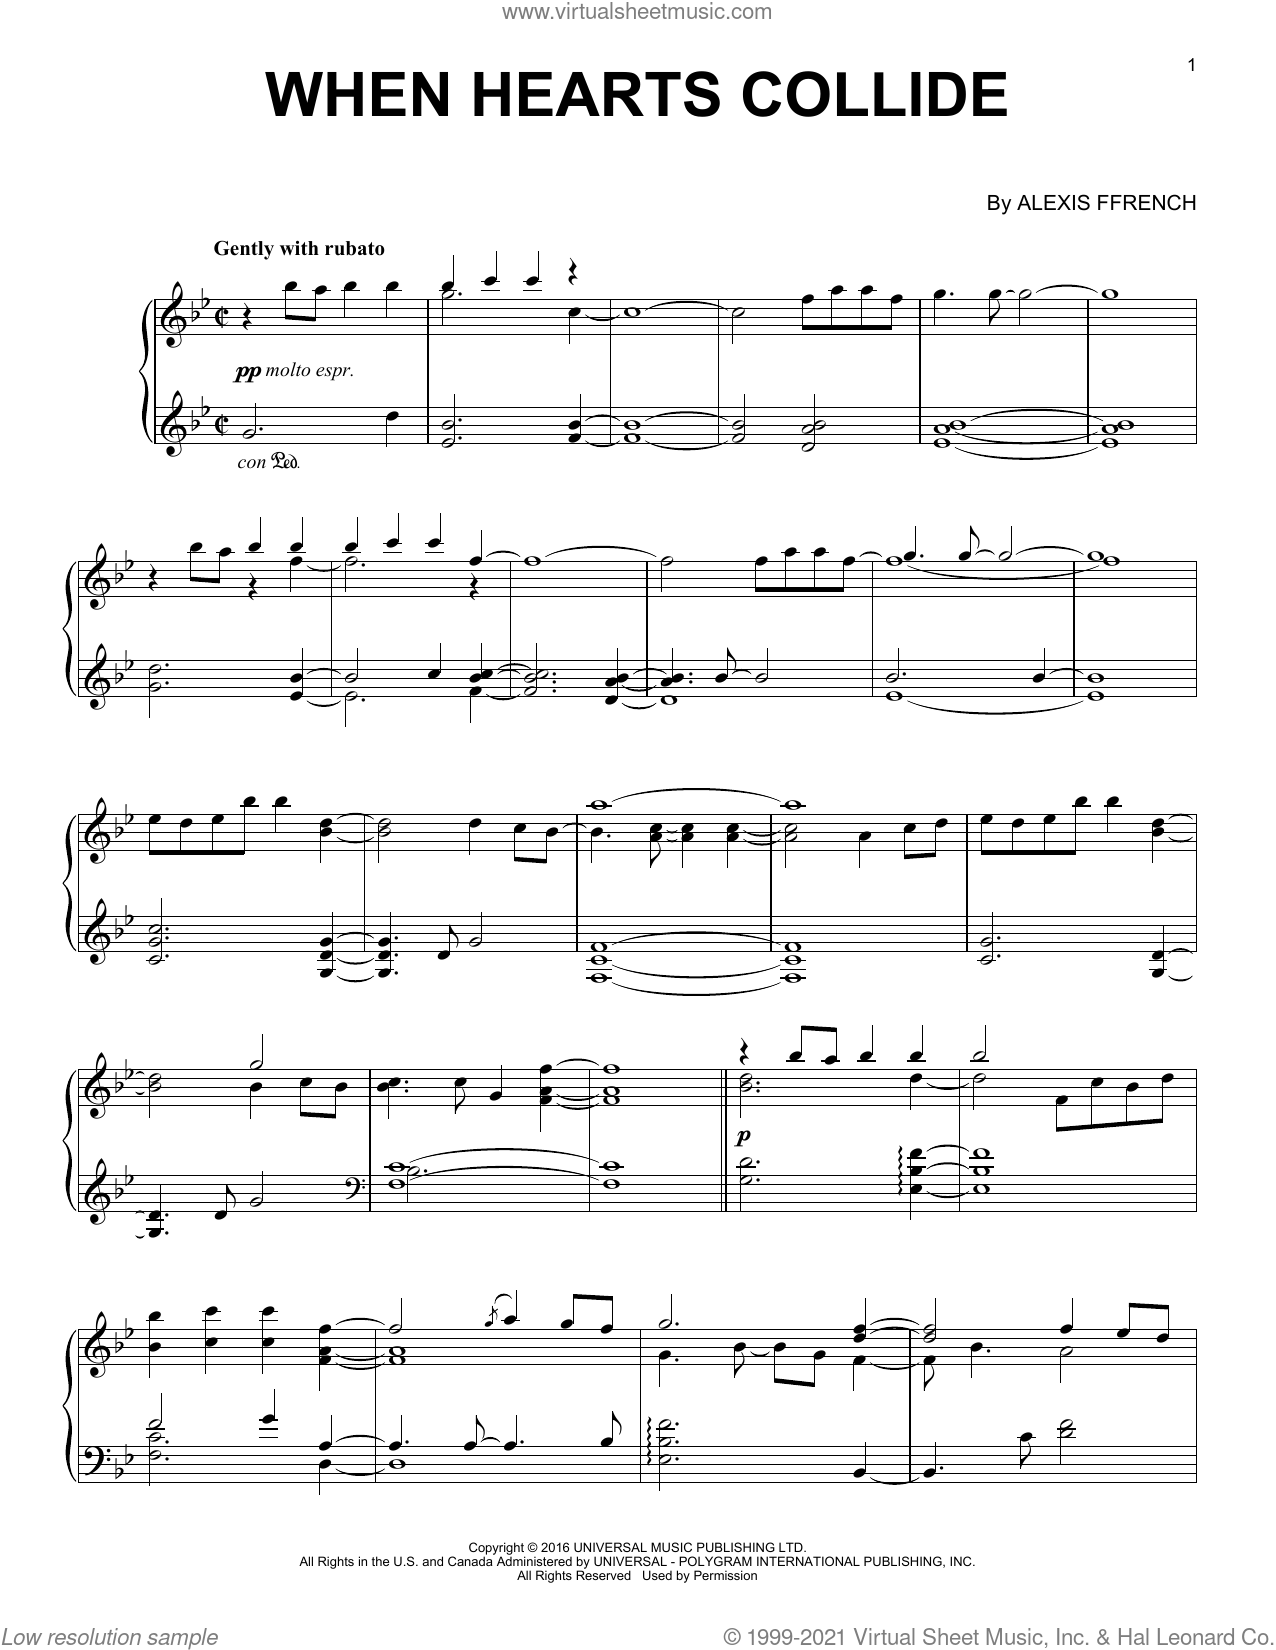 A Link Between Worlds sheet music  Play, print, and download in PDF or  MIDI sheet music on